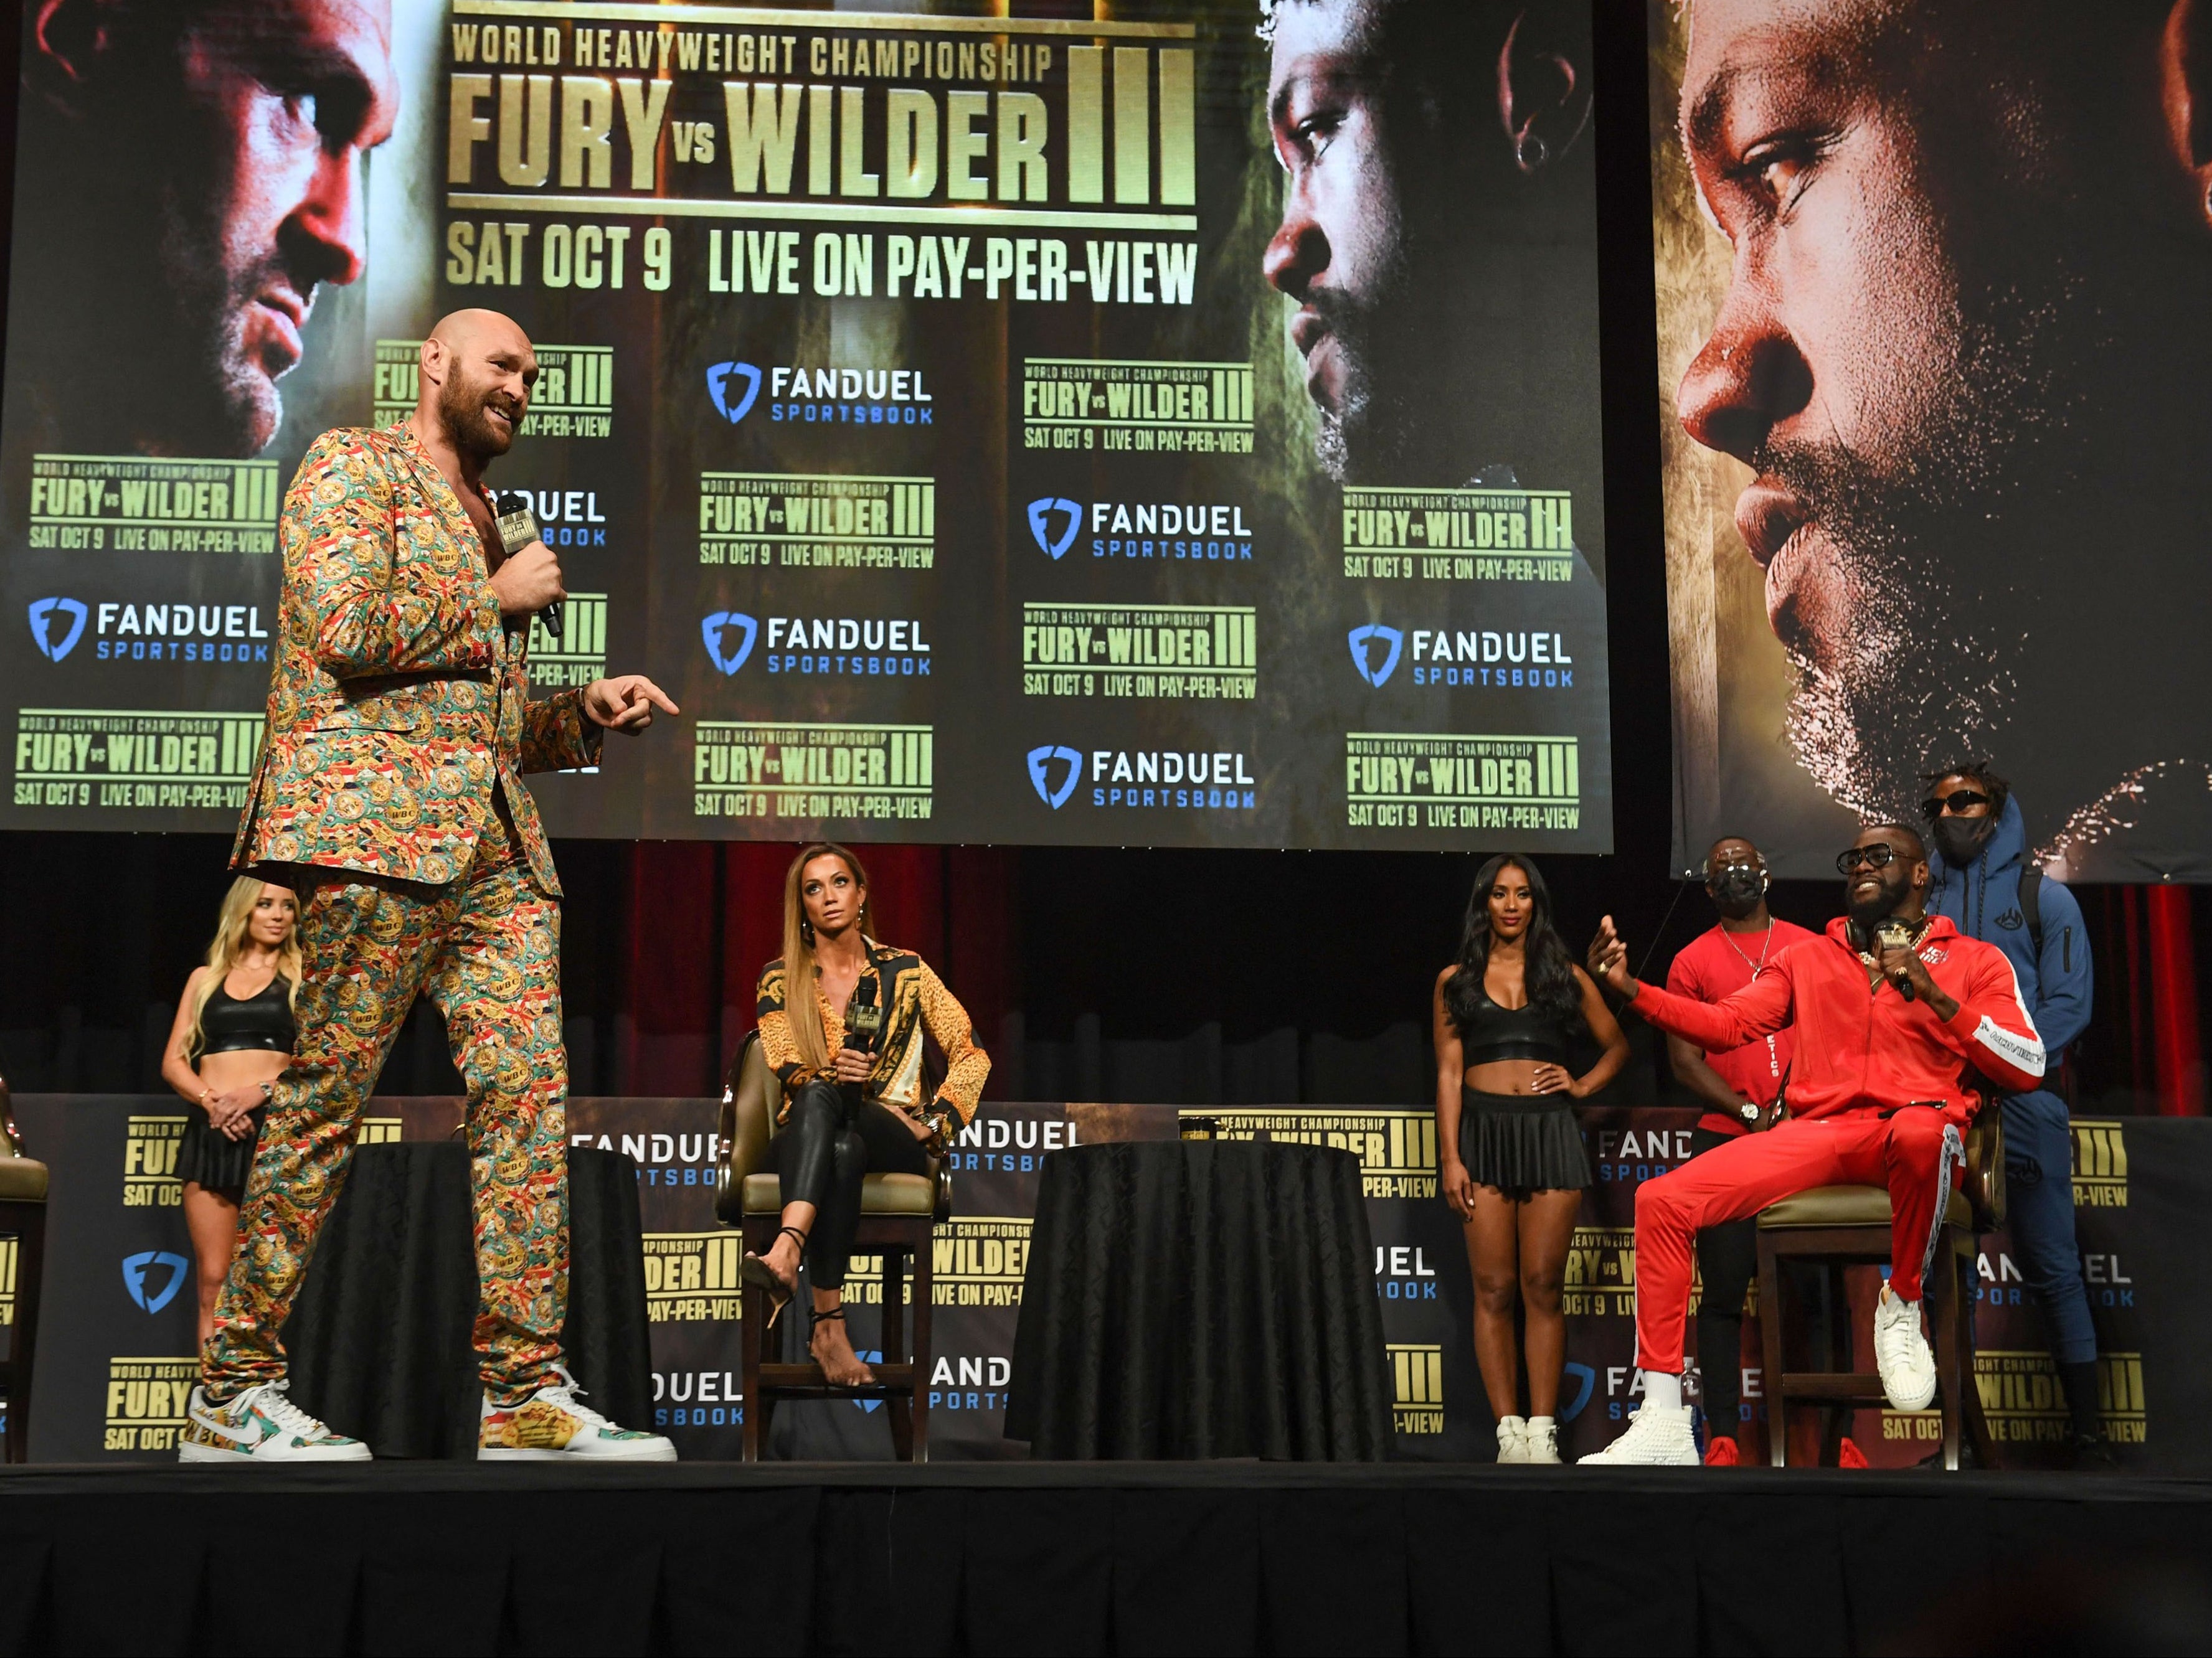 Tyson Fury and Deontay Wilder met face to face at the press conference